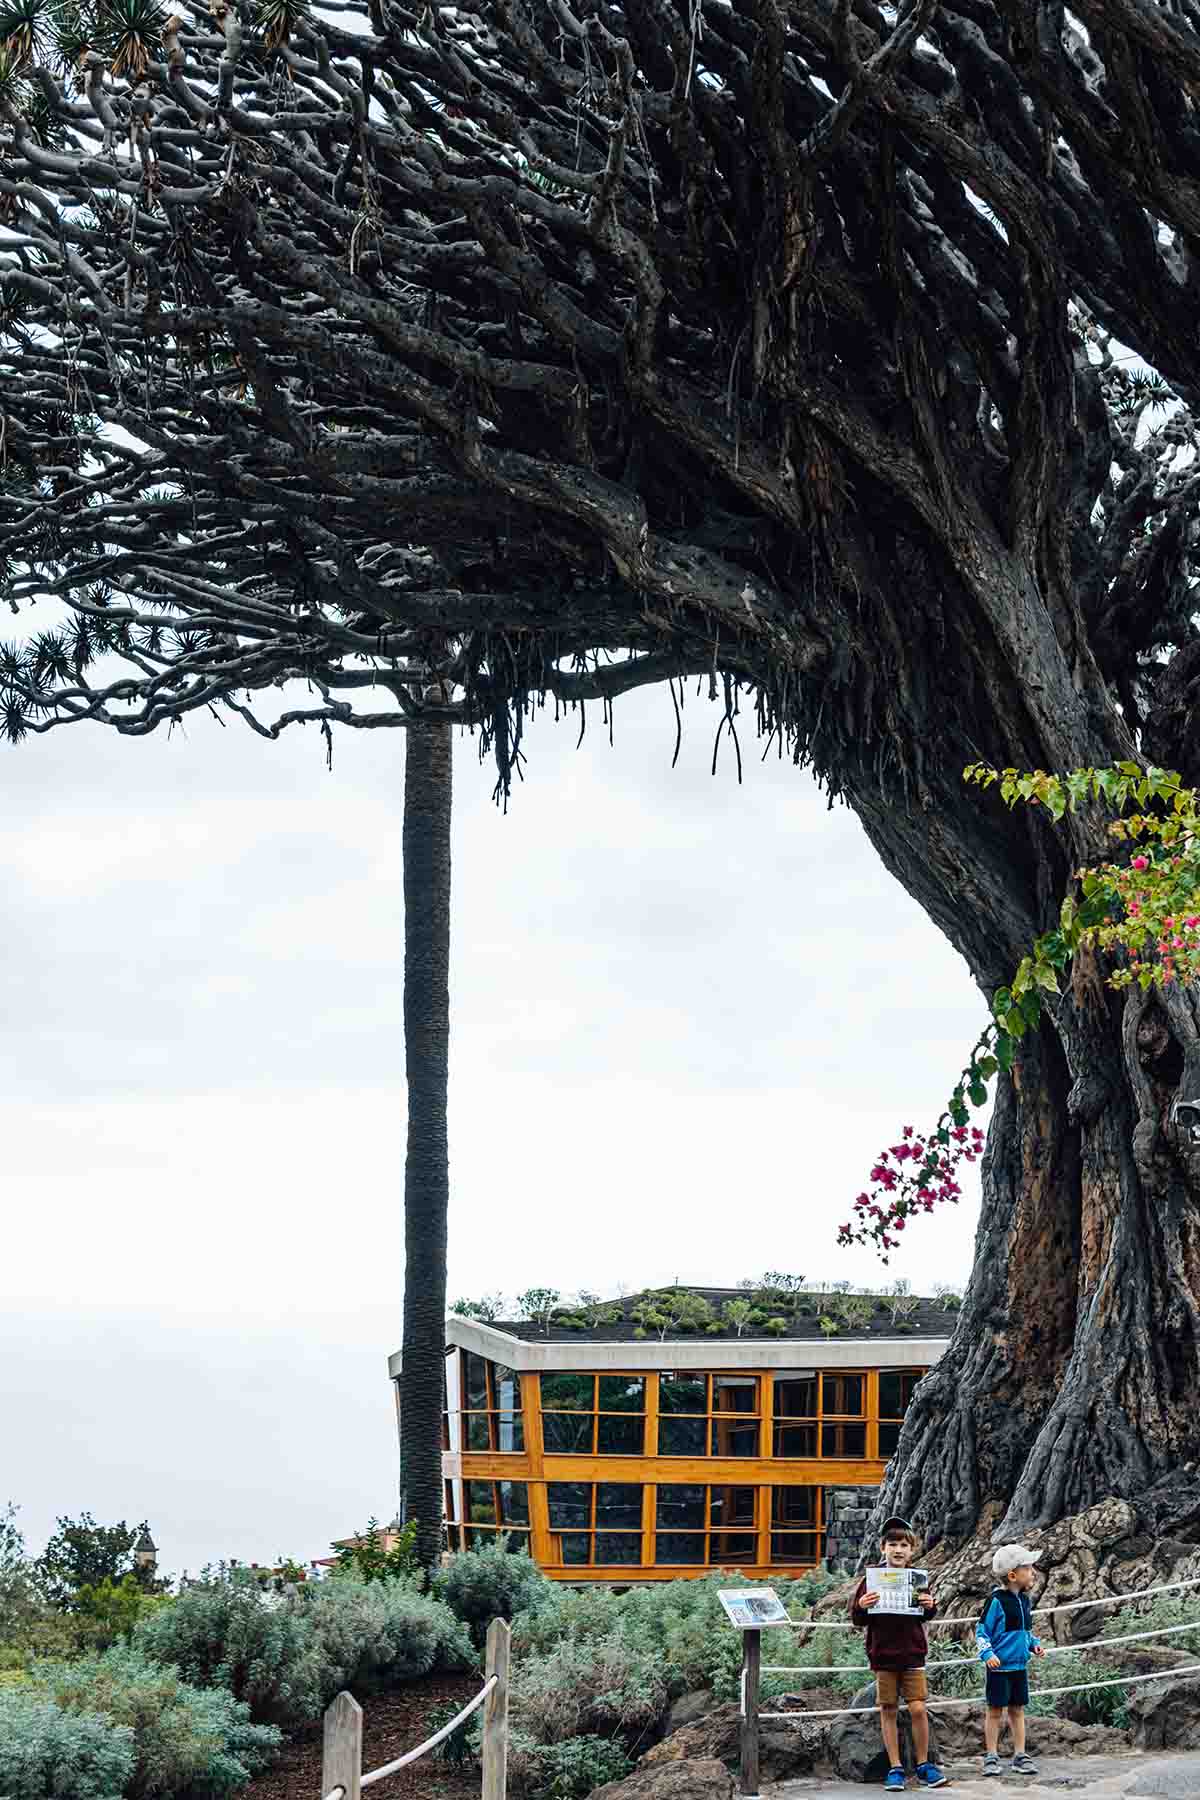 The largest dragon tree in Tenerife